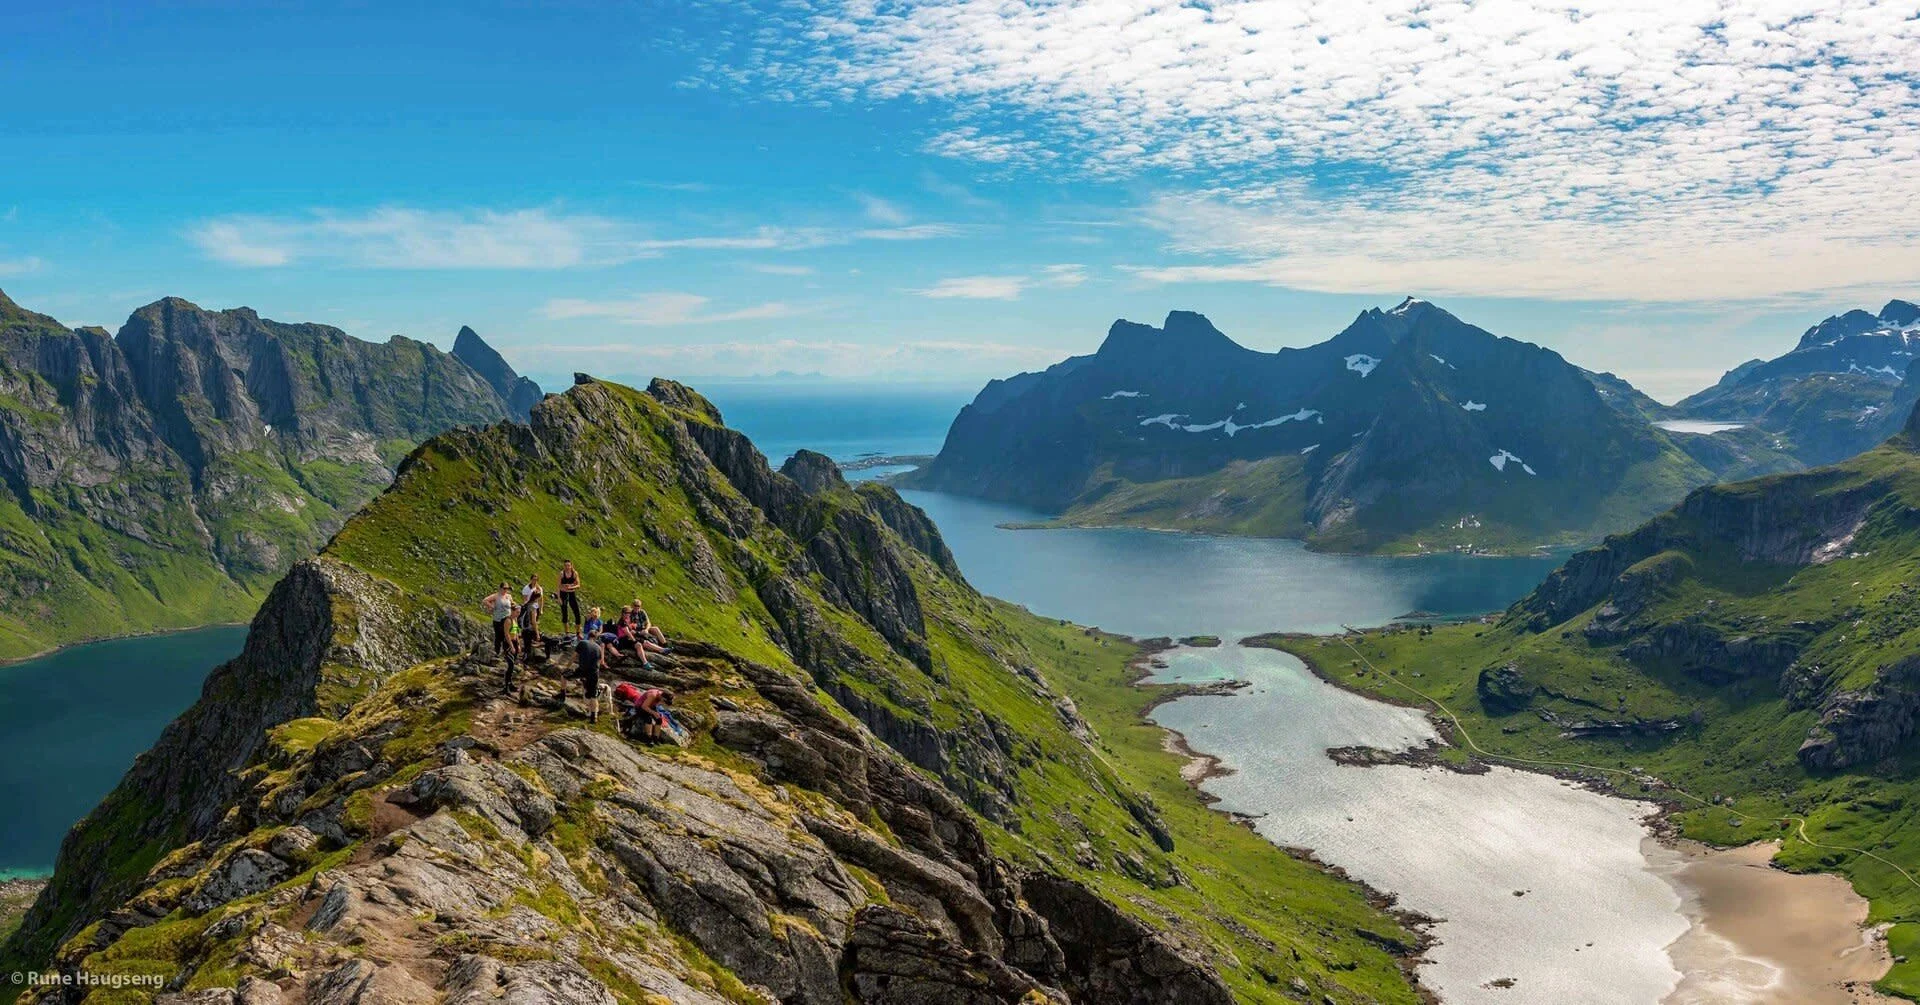 Hikers on a mountain ridge overlooking a fjord with emerald waters and rugged peaks.